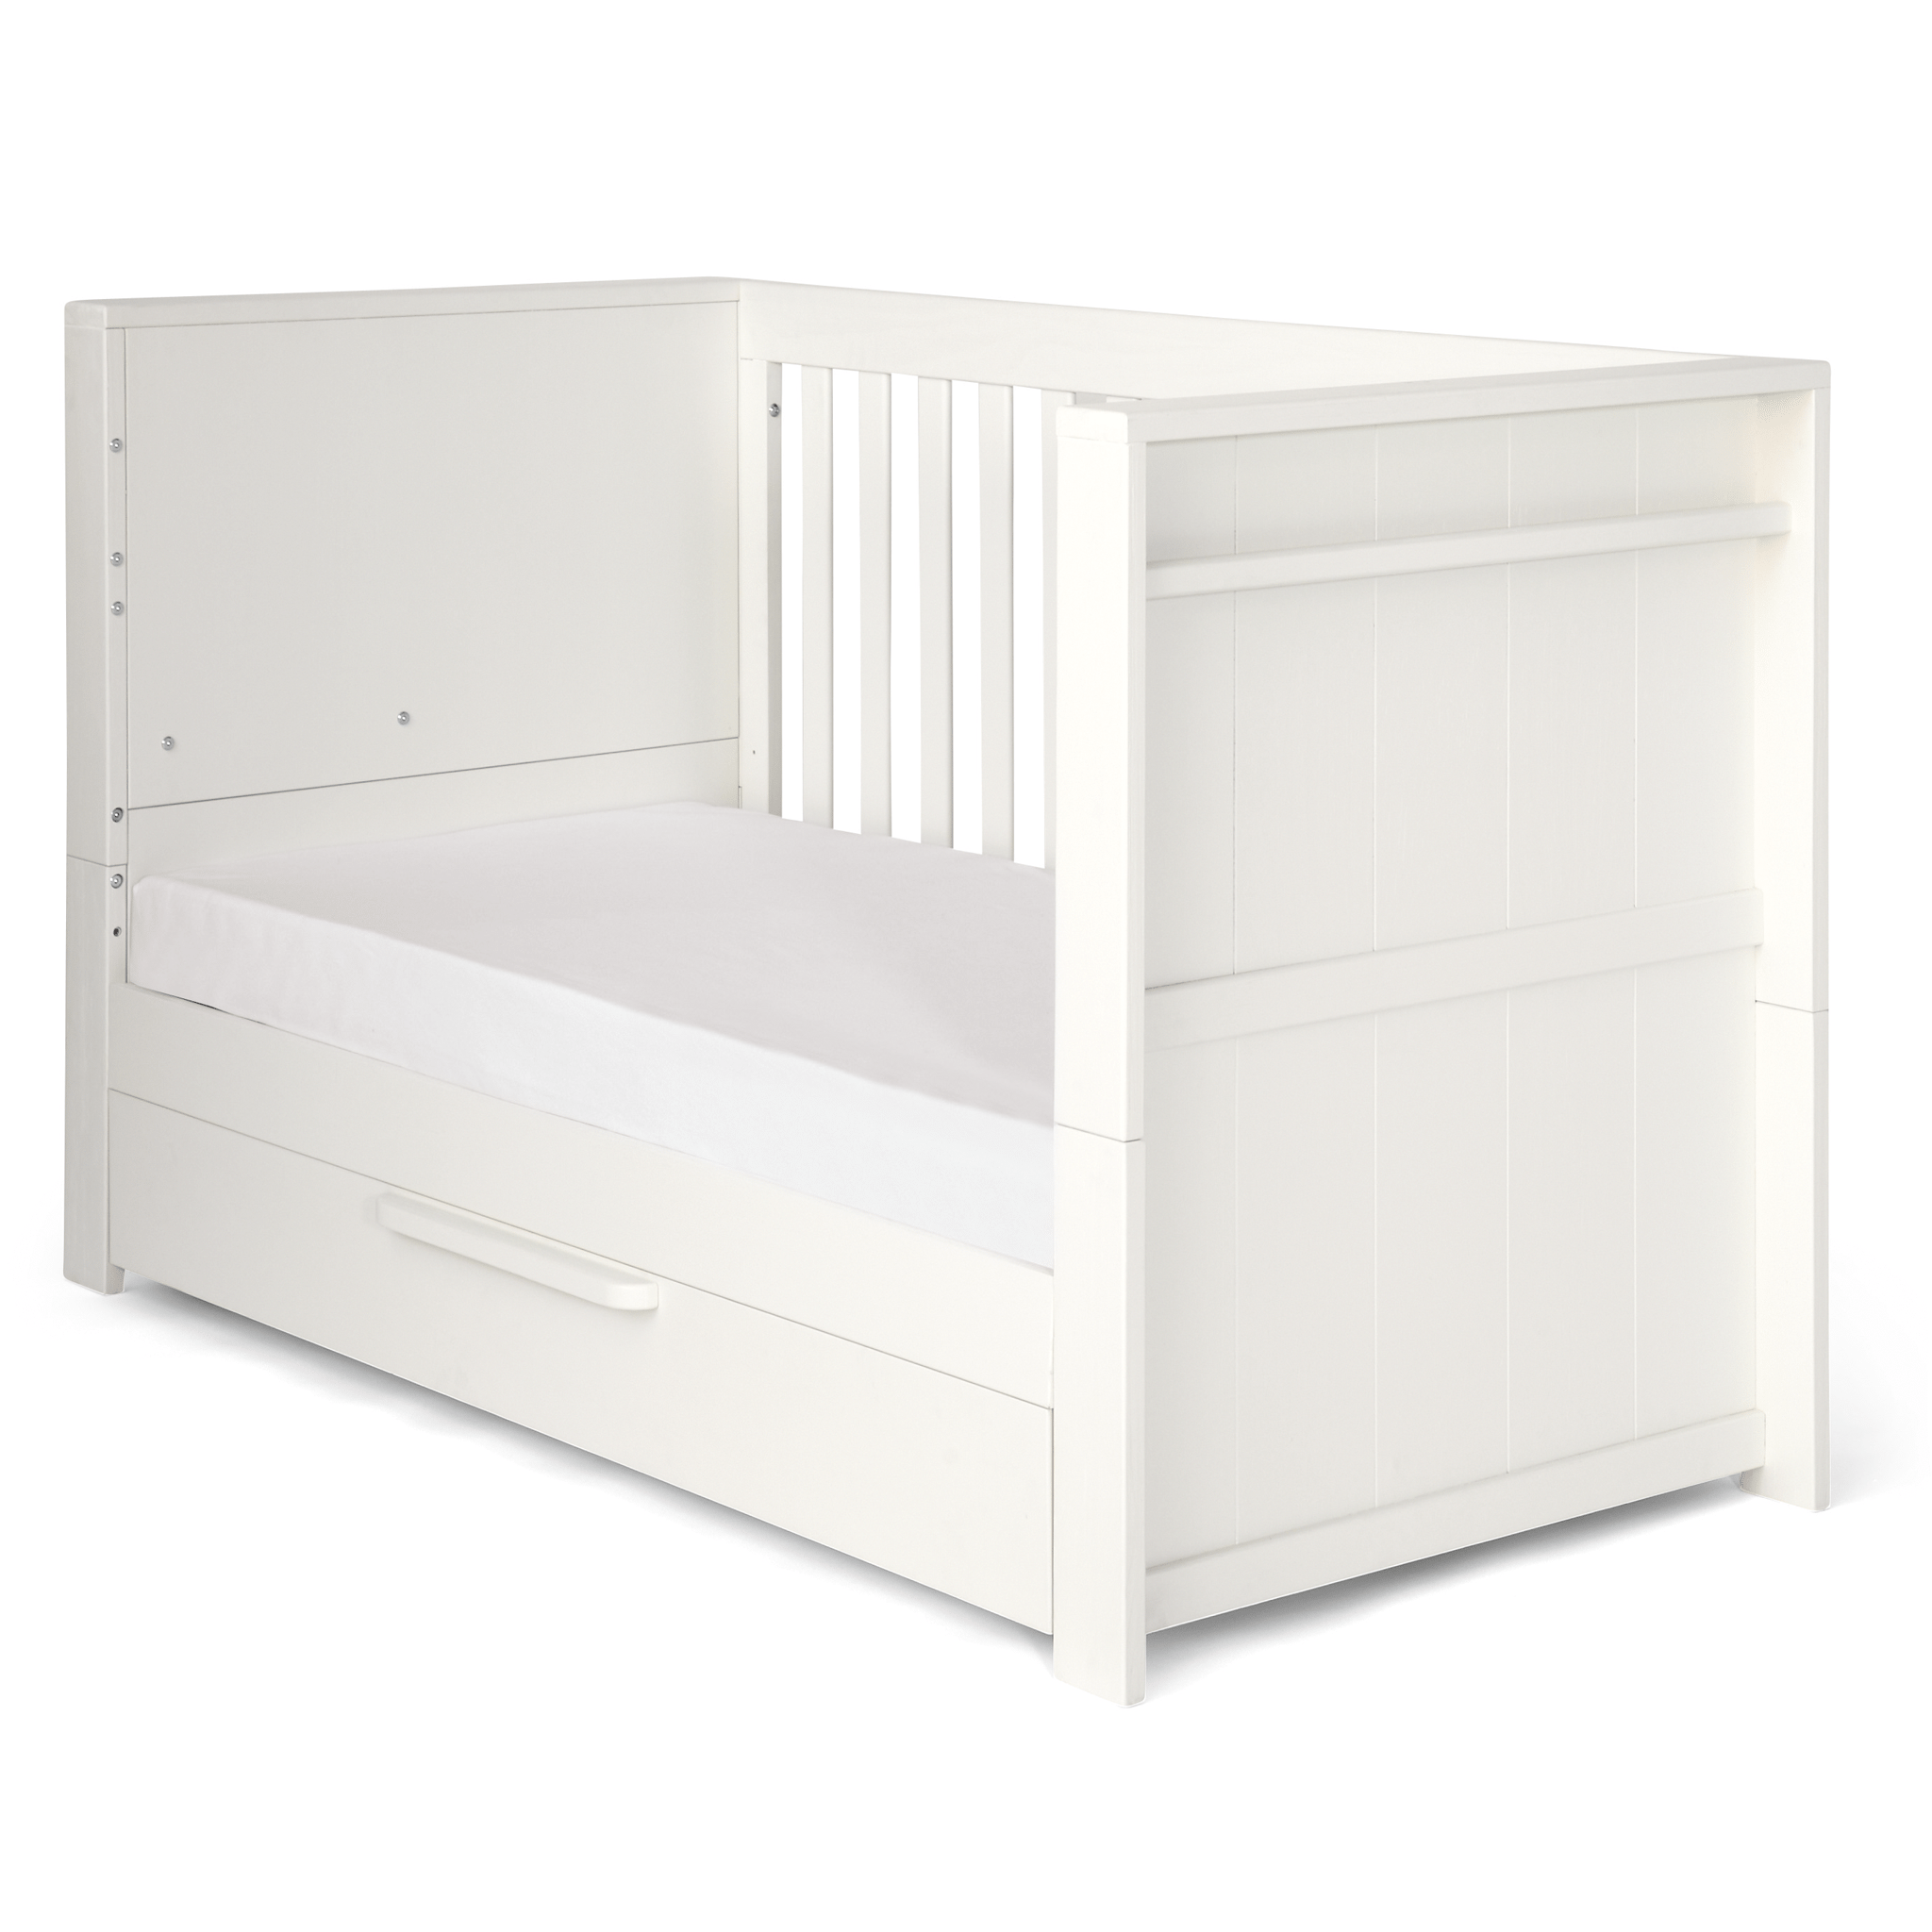 Mamas & Papas Franklin 3 Piece Cot Bed Roomset White Wash